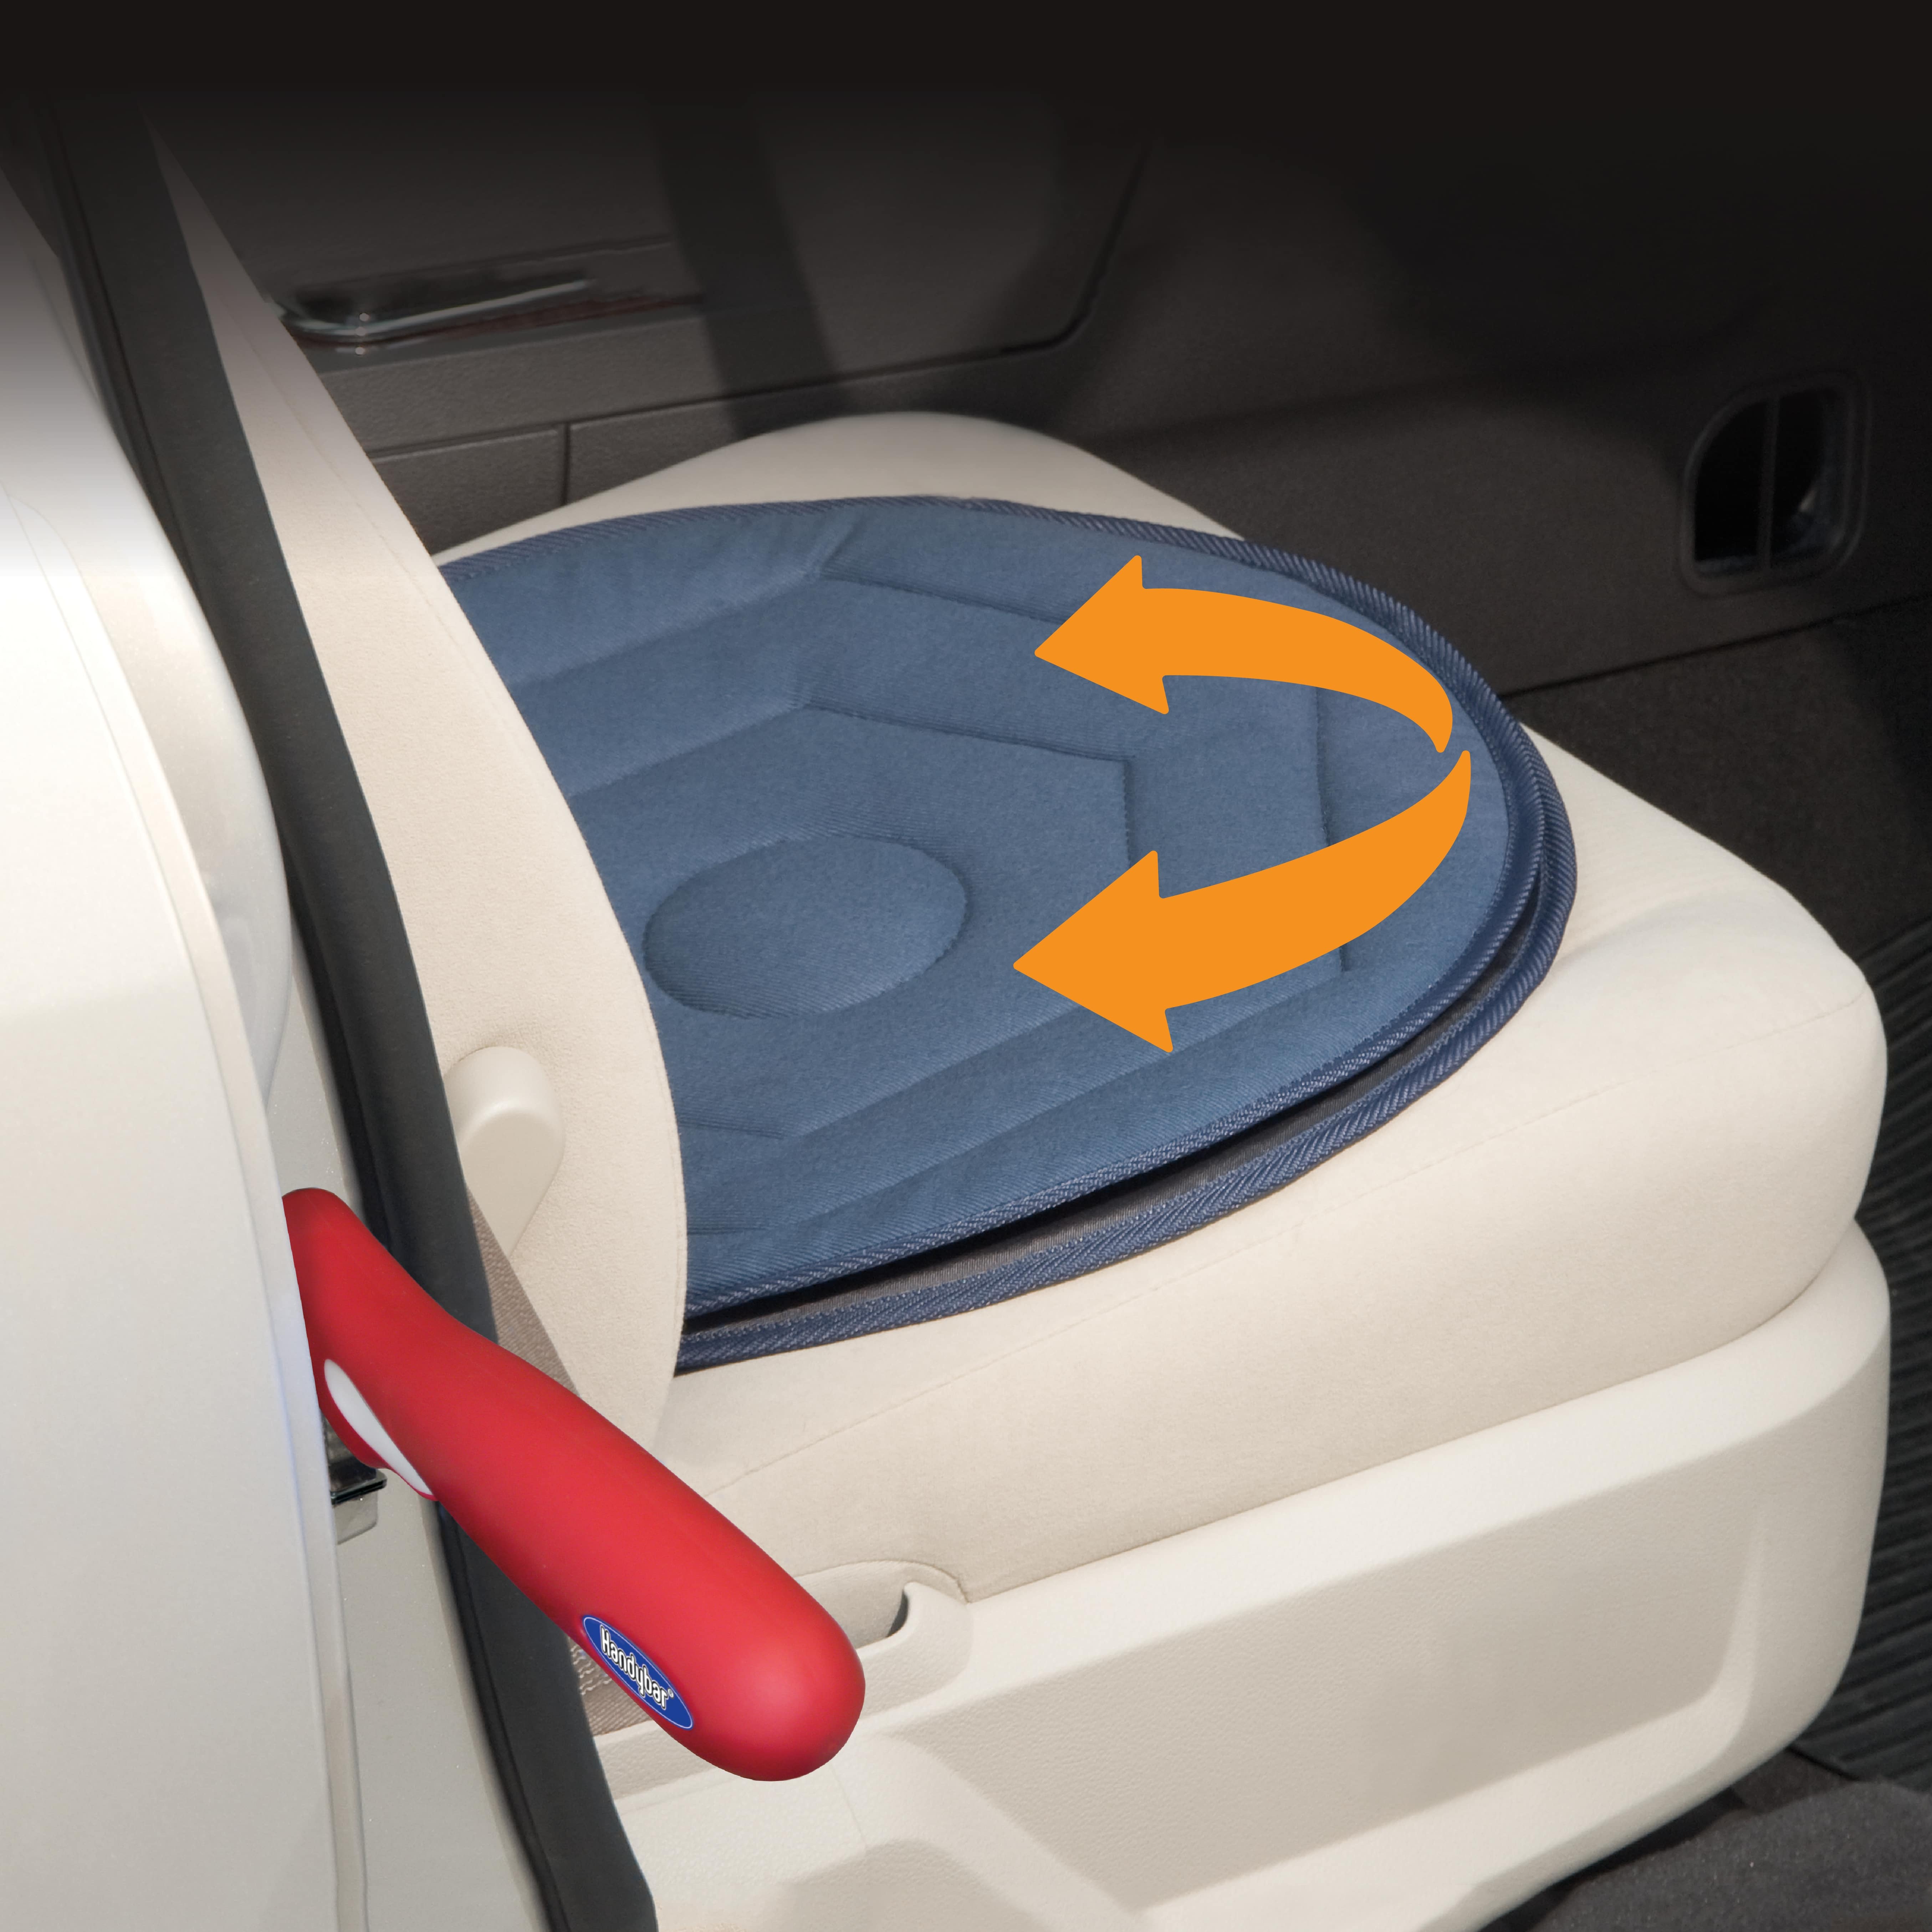 Stander Automobility Solution, 2 in1 Handy Bar and Swivel Seat Cushion Combo - image 5 of 8